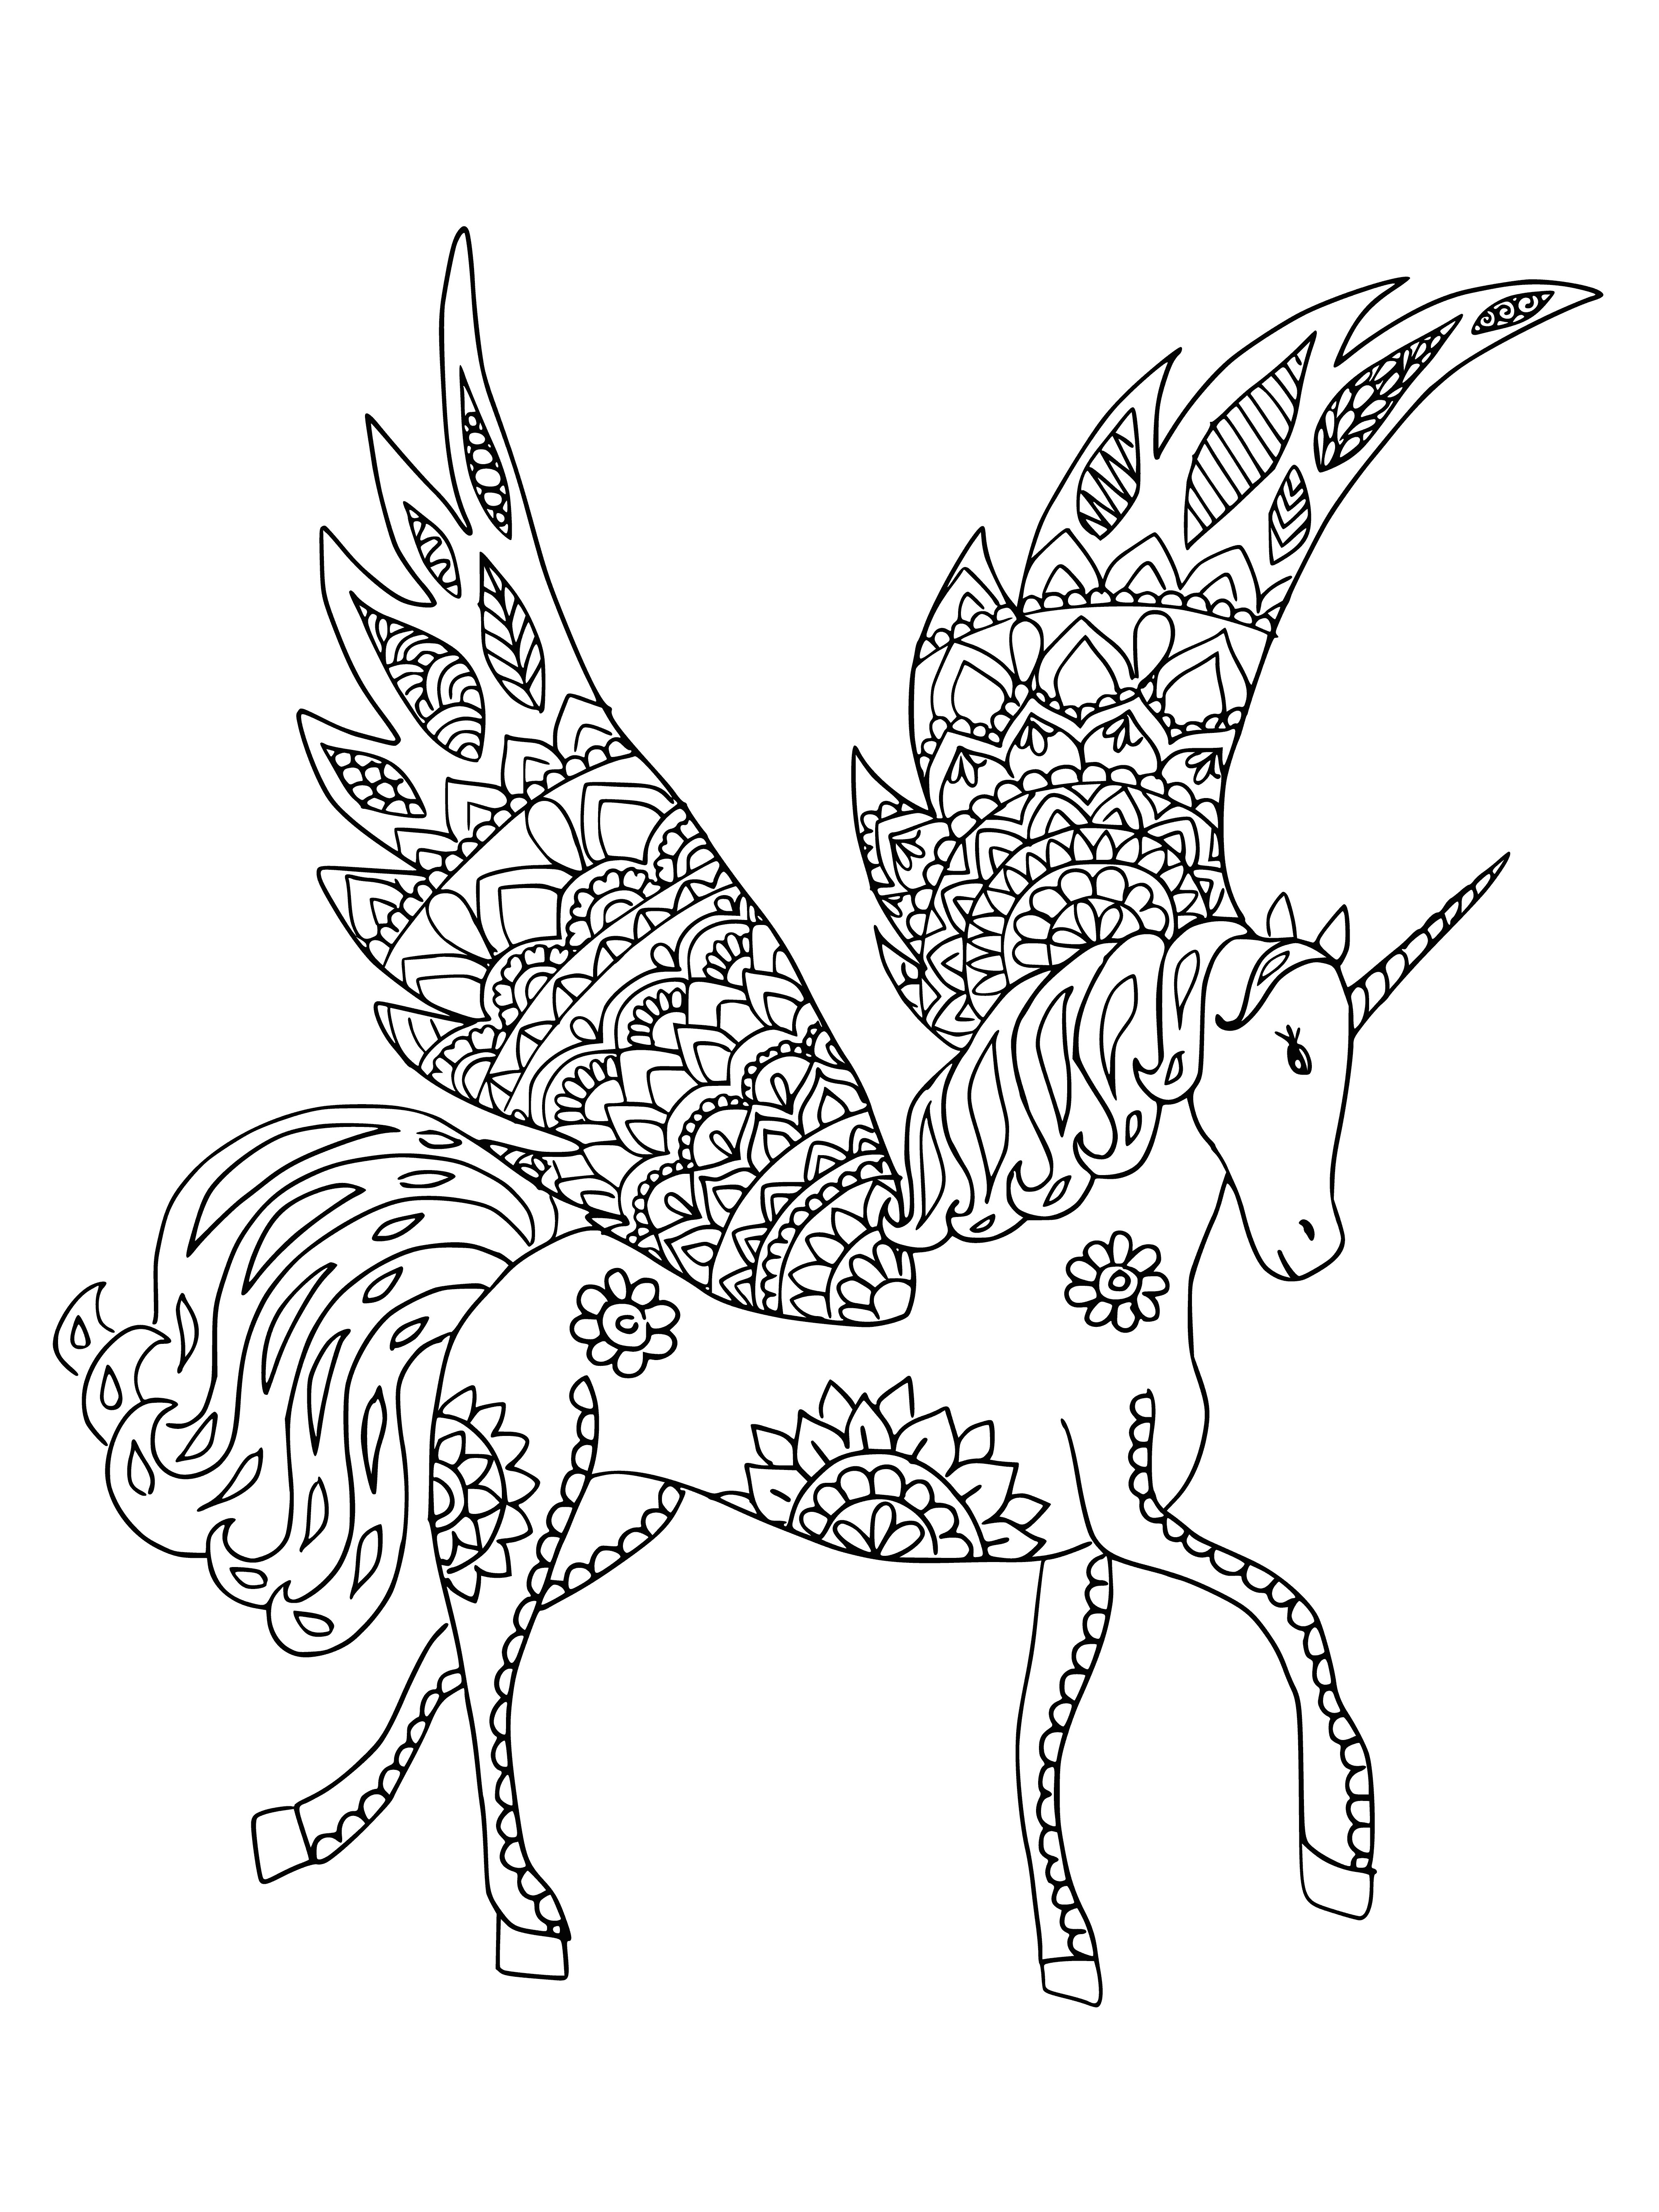 coloring page: Coloring in a Unicorn antistress to reduce stress! Features a colorful and creative design, perfect for adults. #adultcoloring